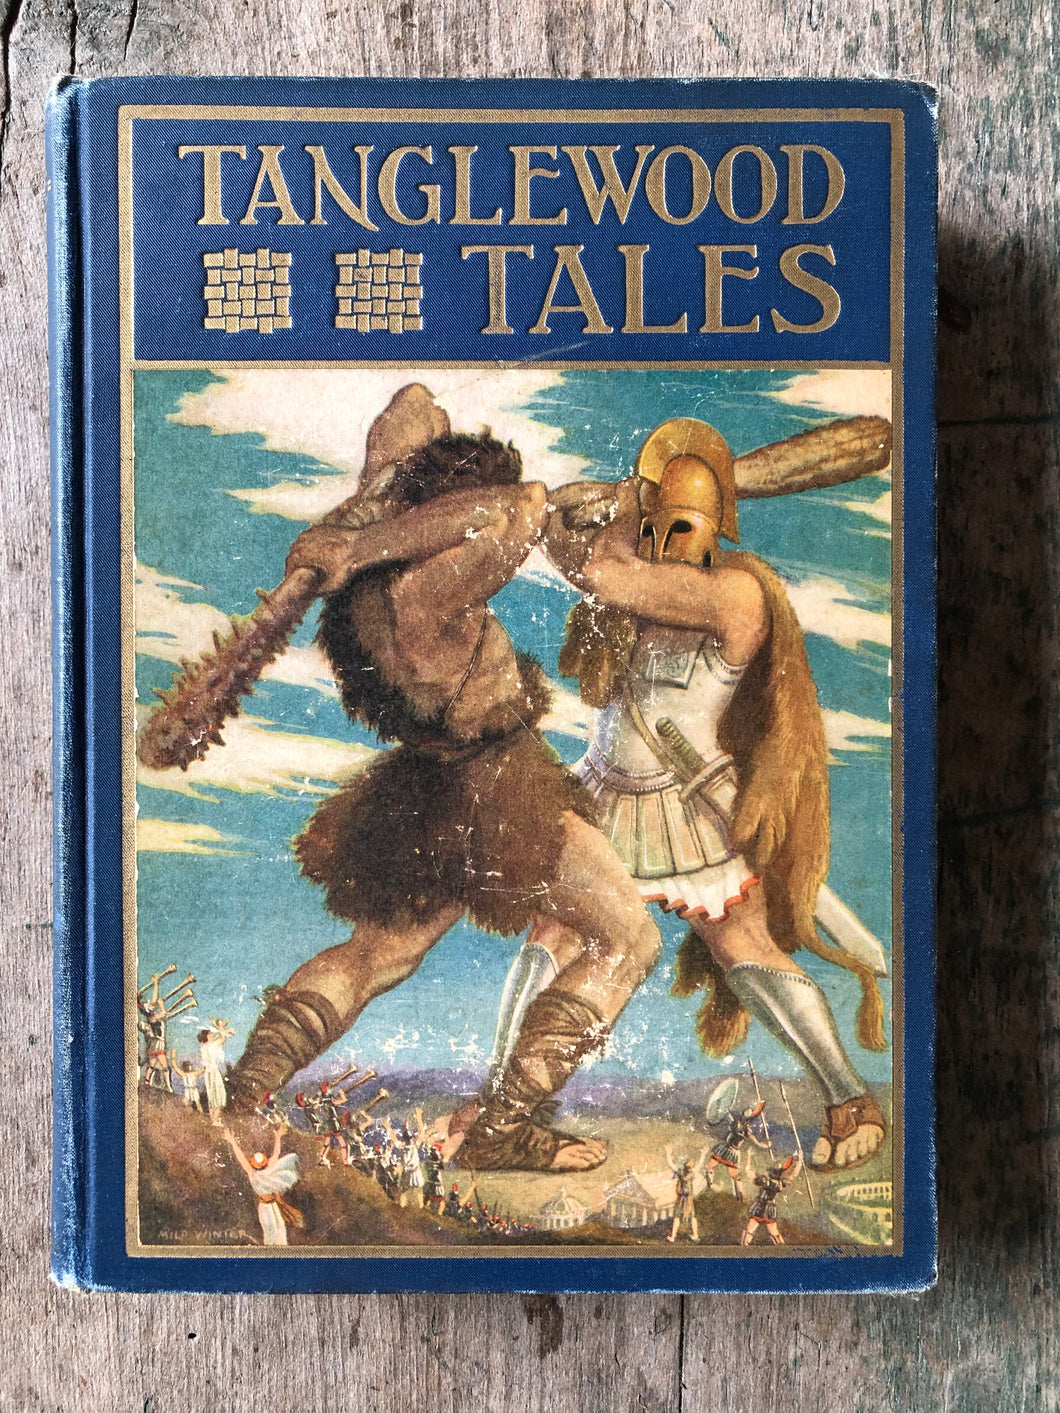 Tanglewood Tales by Nathaniel Hawthorne. With illustrations by Milo Winter